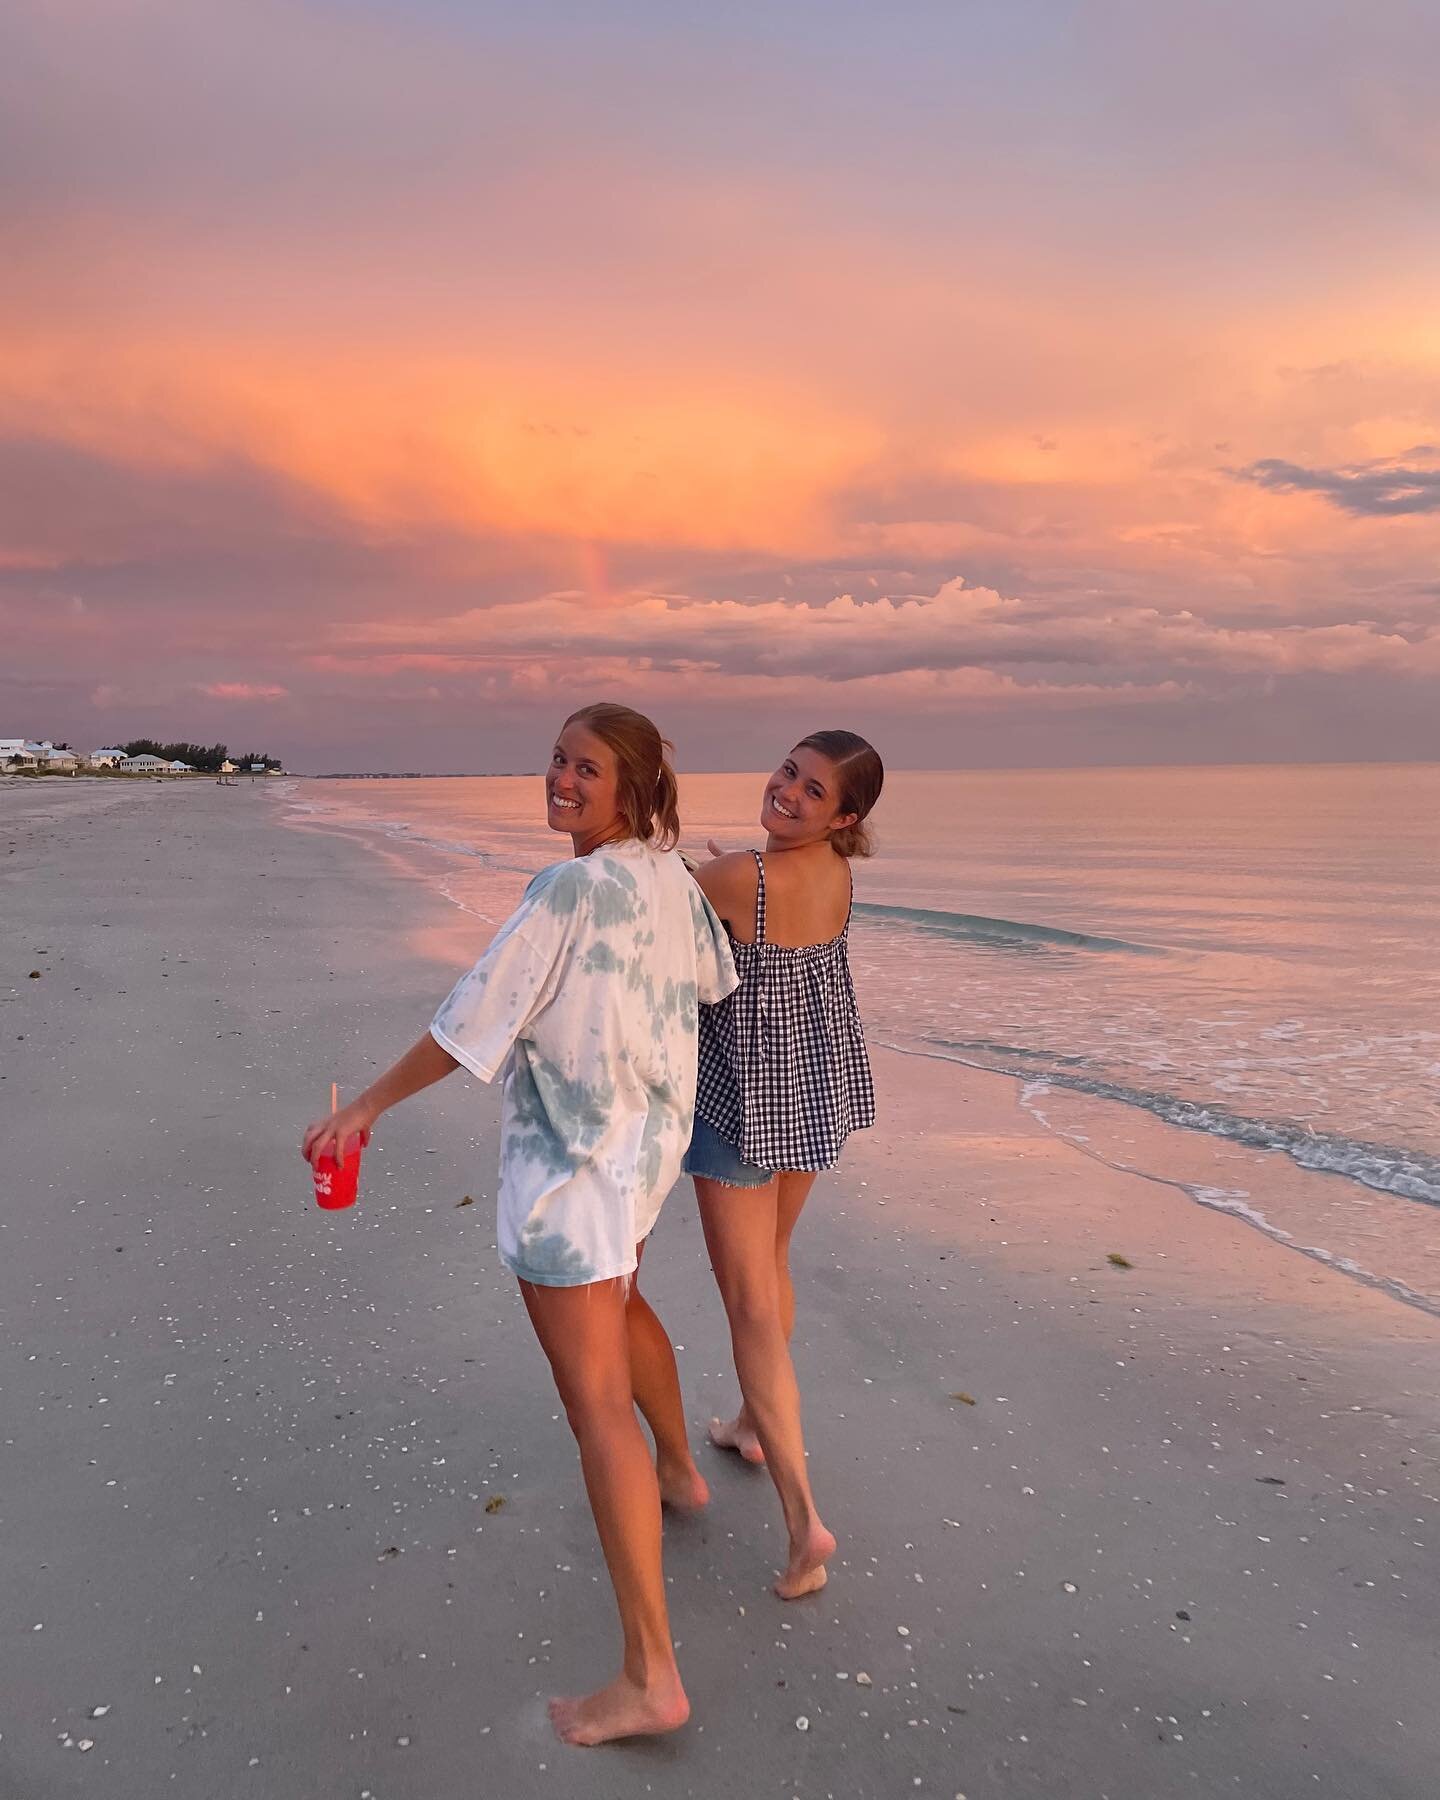 Our faces when we realize we get to do this every night for the next week 🥰 

#nofilter #happygals #travelphotographers #travelbloggers #travel #beach #summer #florida